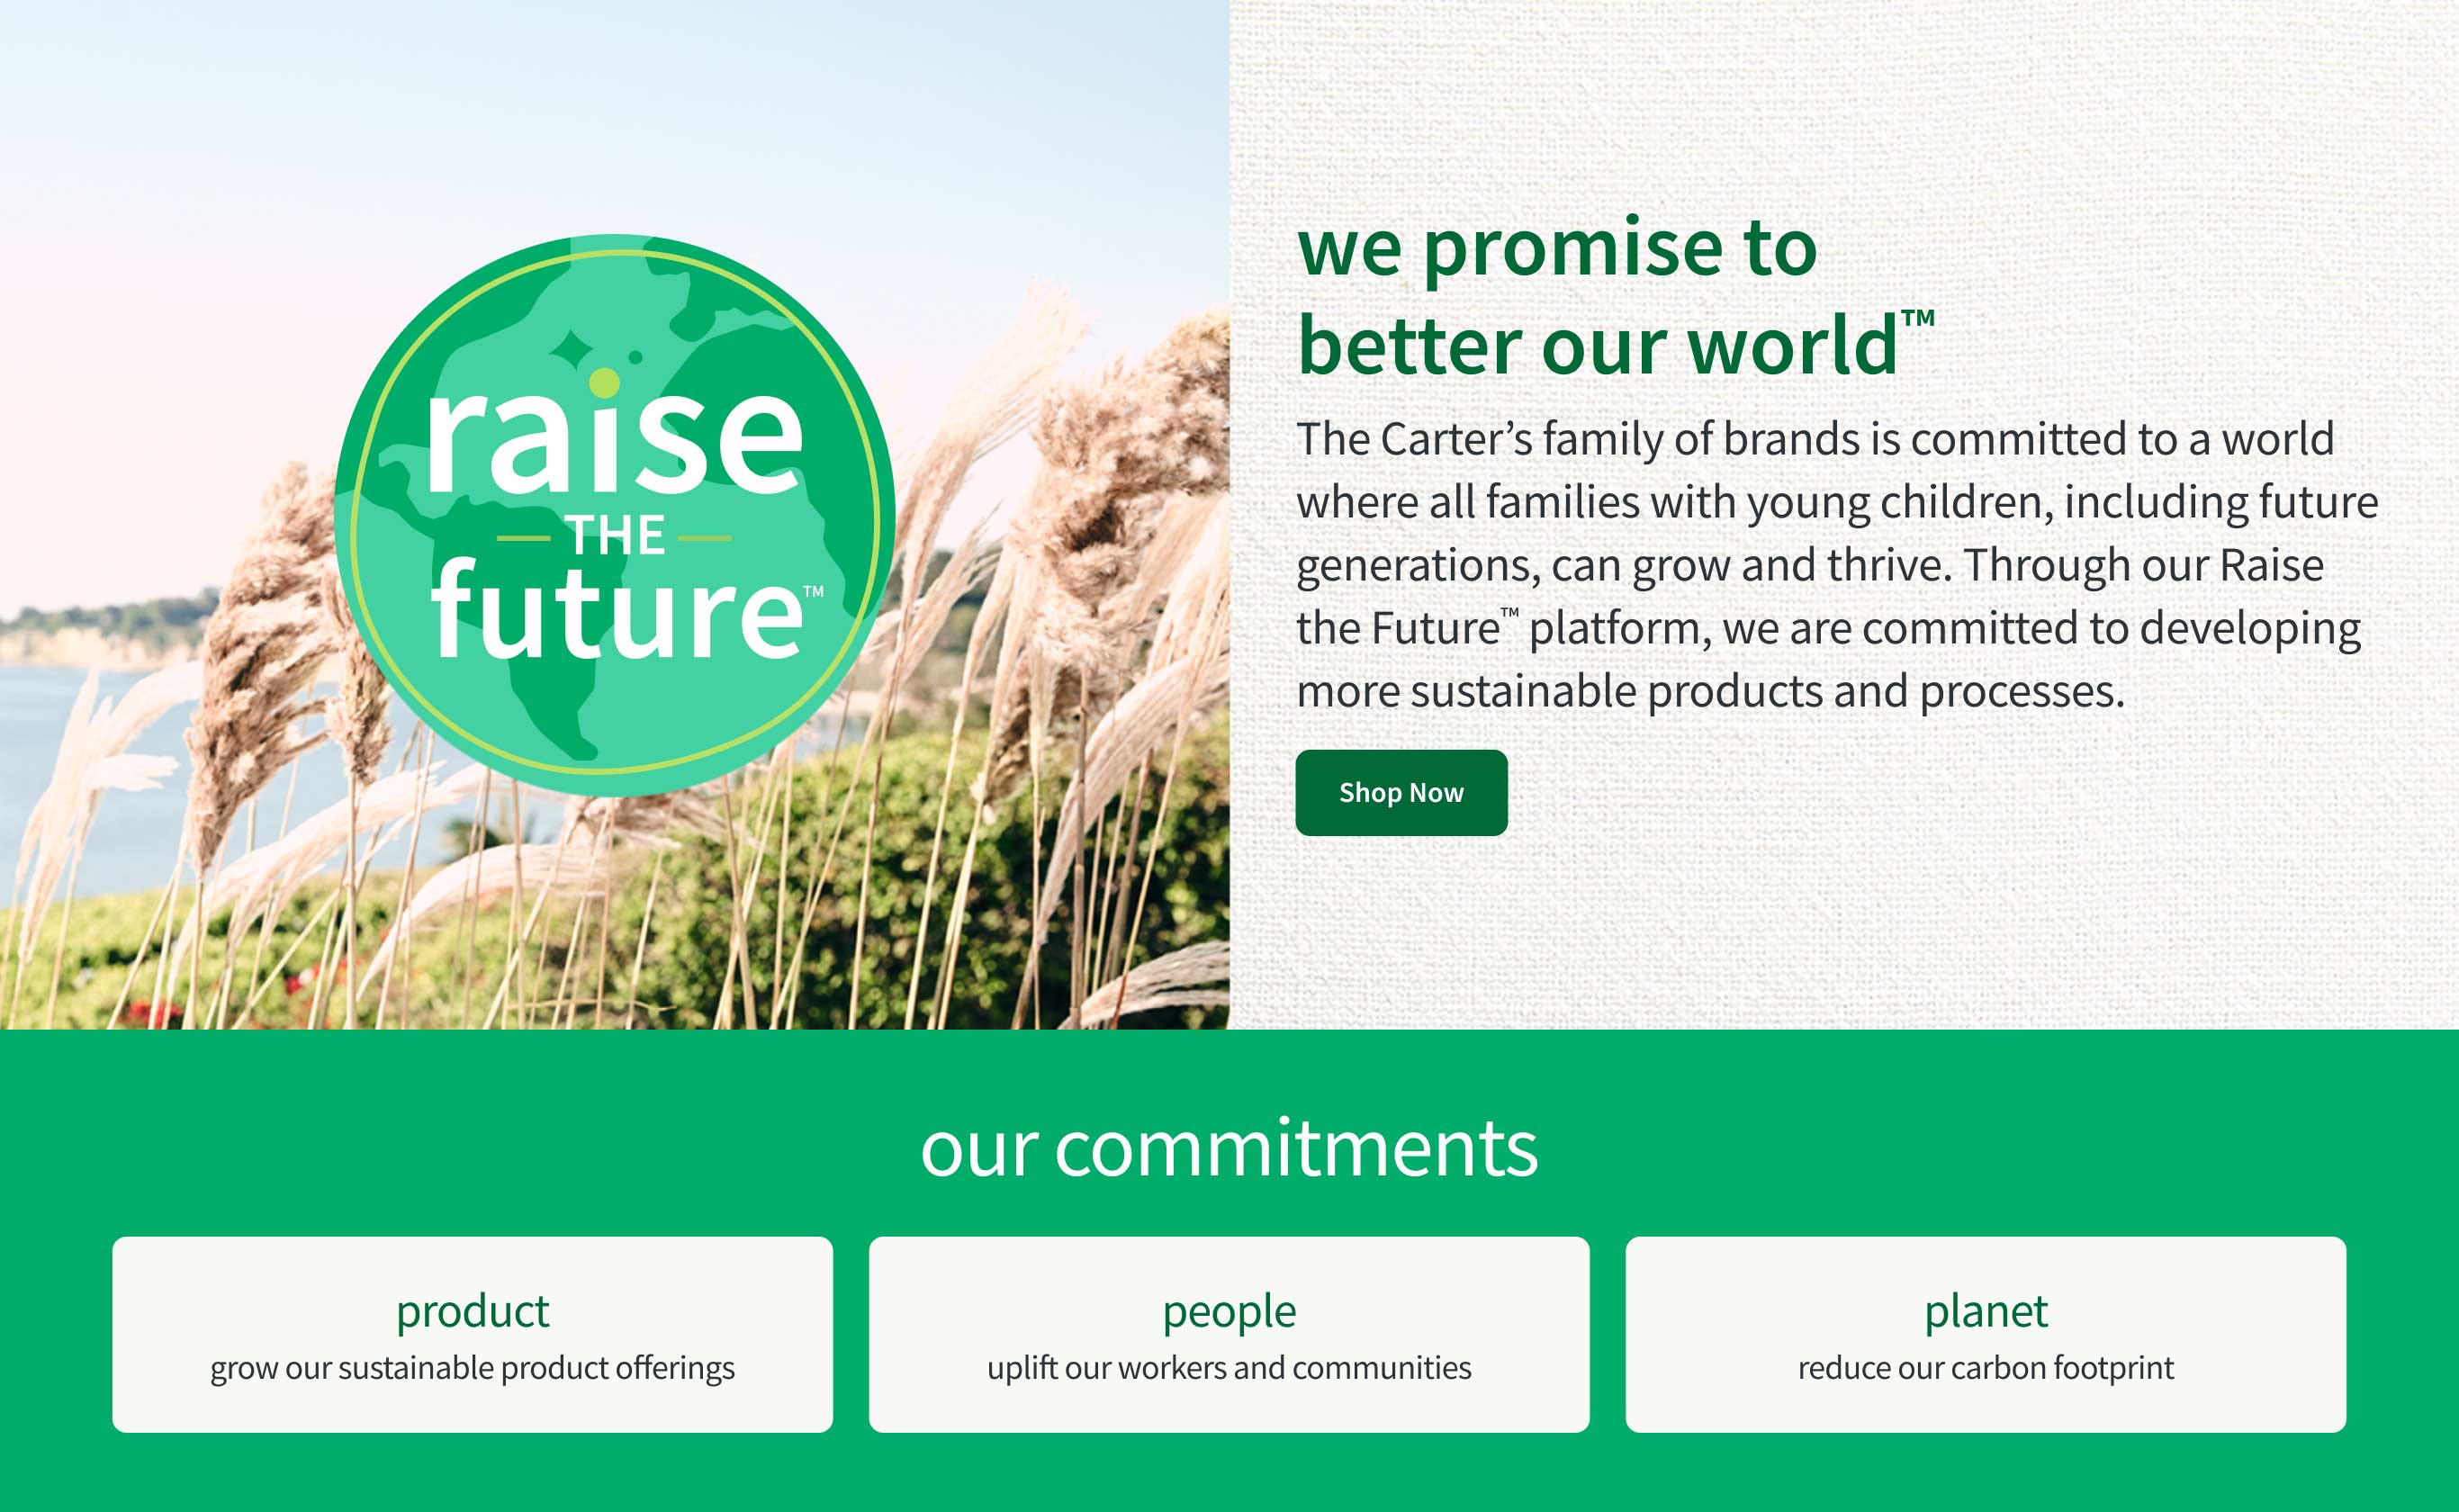 raise the future we promise to better our world™ The Carter’s family of brands is committed to a world where all families with young children, including future generations, can grow and thrive. Through our Raise the Future™ platform, we are committed to developing more sustainable products and processes. | shop now